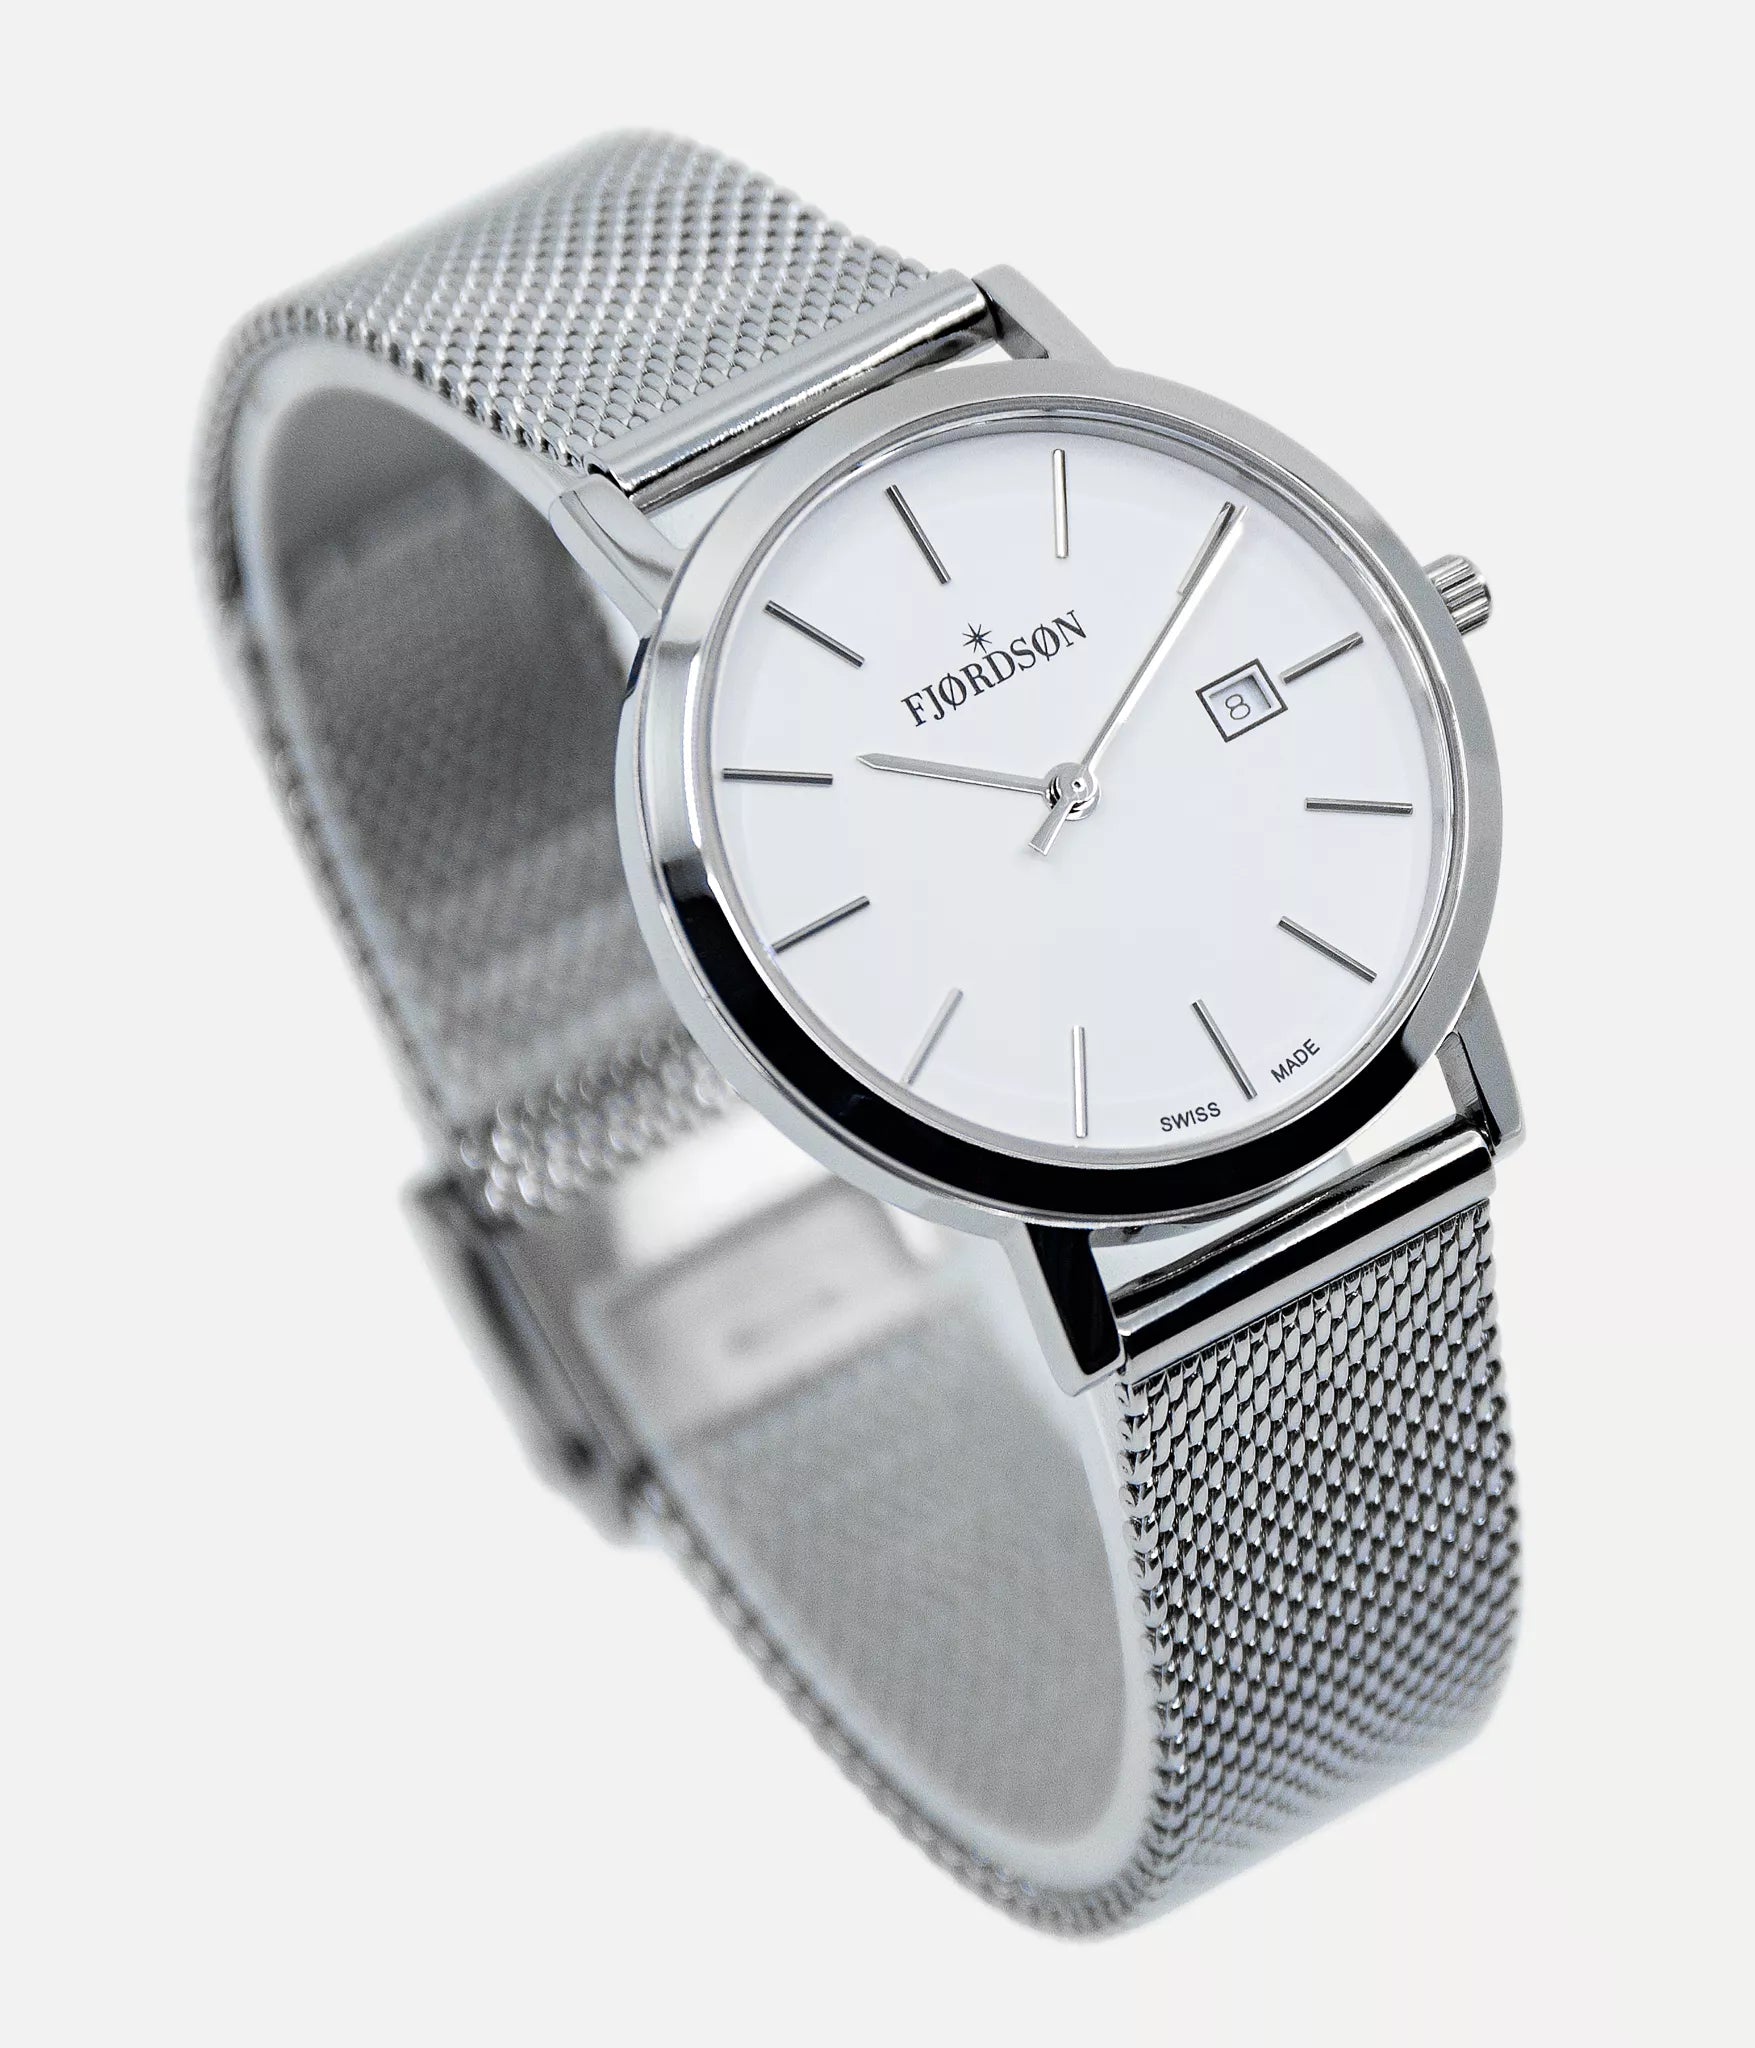 Strap on white dial watch - Fjordson Silver Metal Mesh Watch strap silver buckle - WOMEN - vegan & approved by PETA - Swiss made